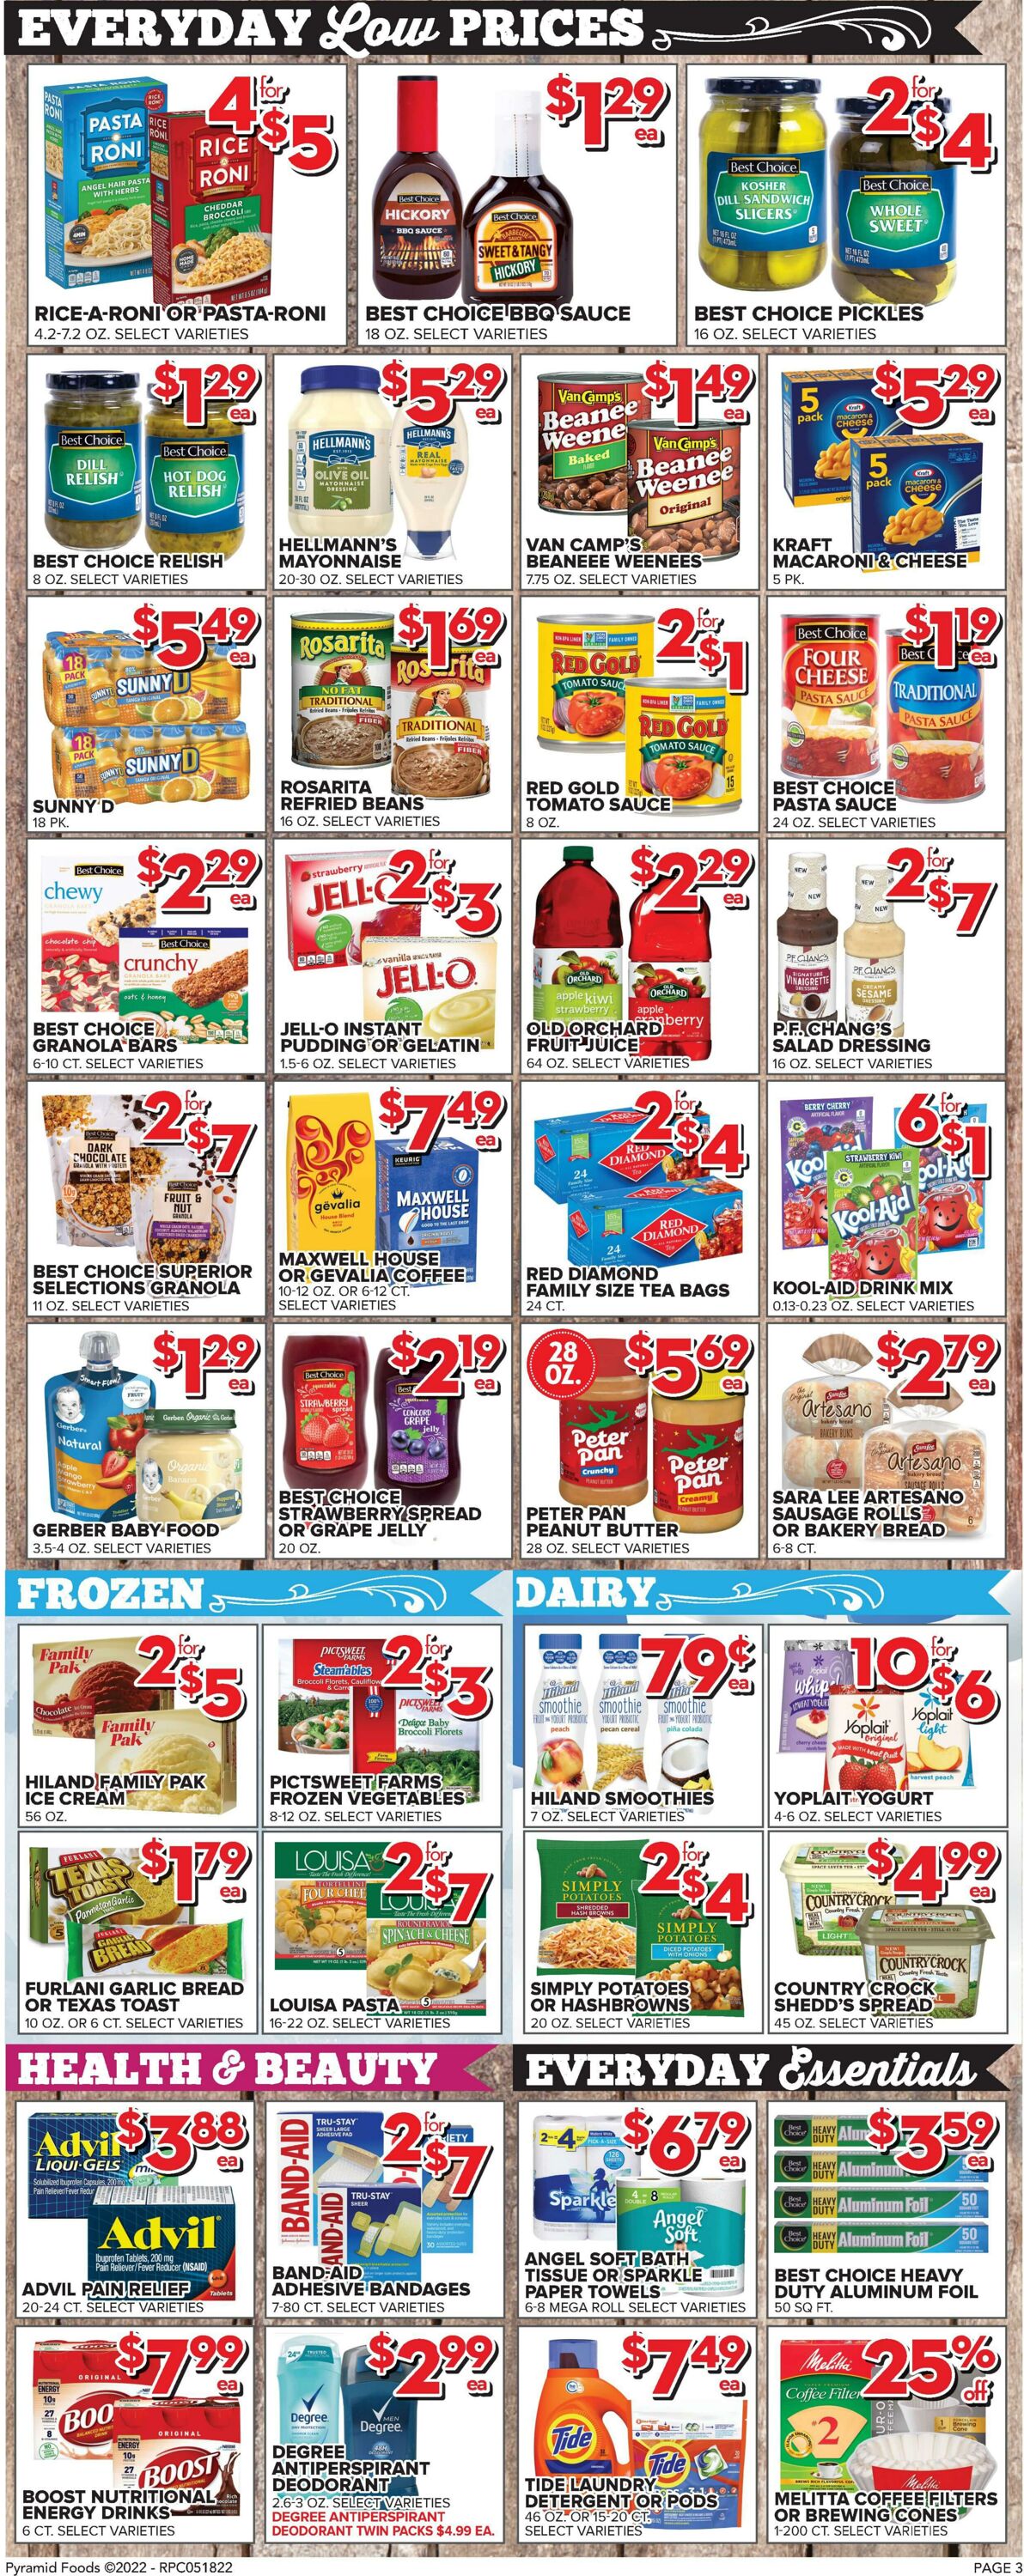 Weekly ad Price Cutter 05/18/2022 - 05/24/2022